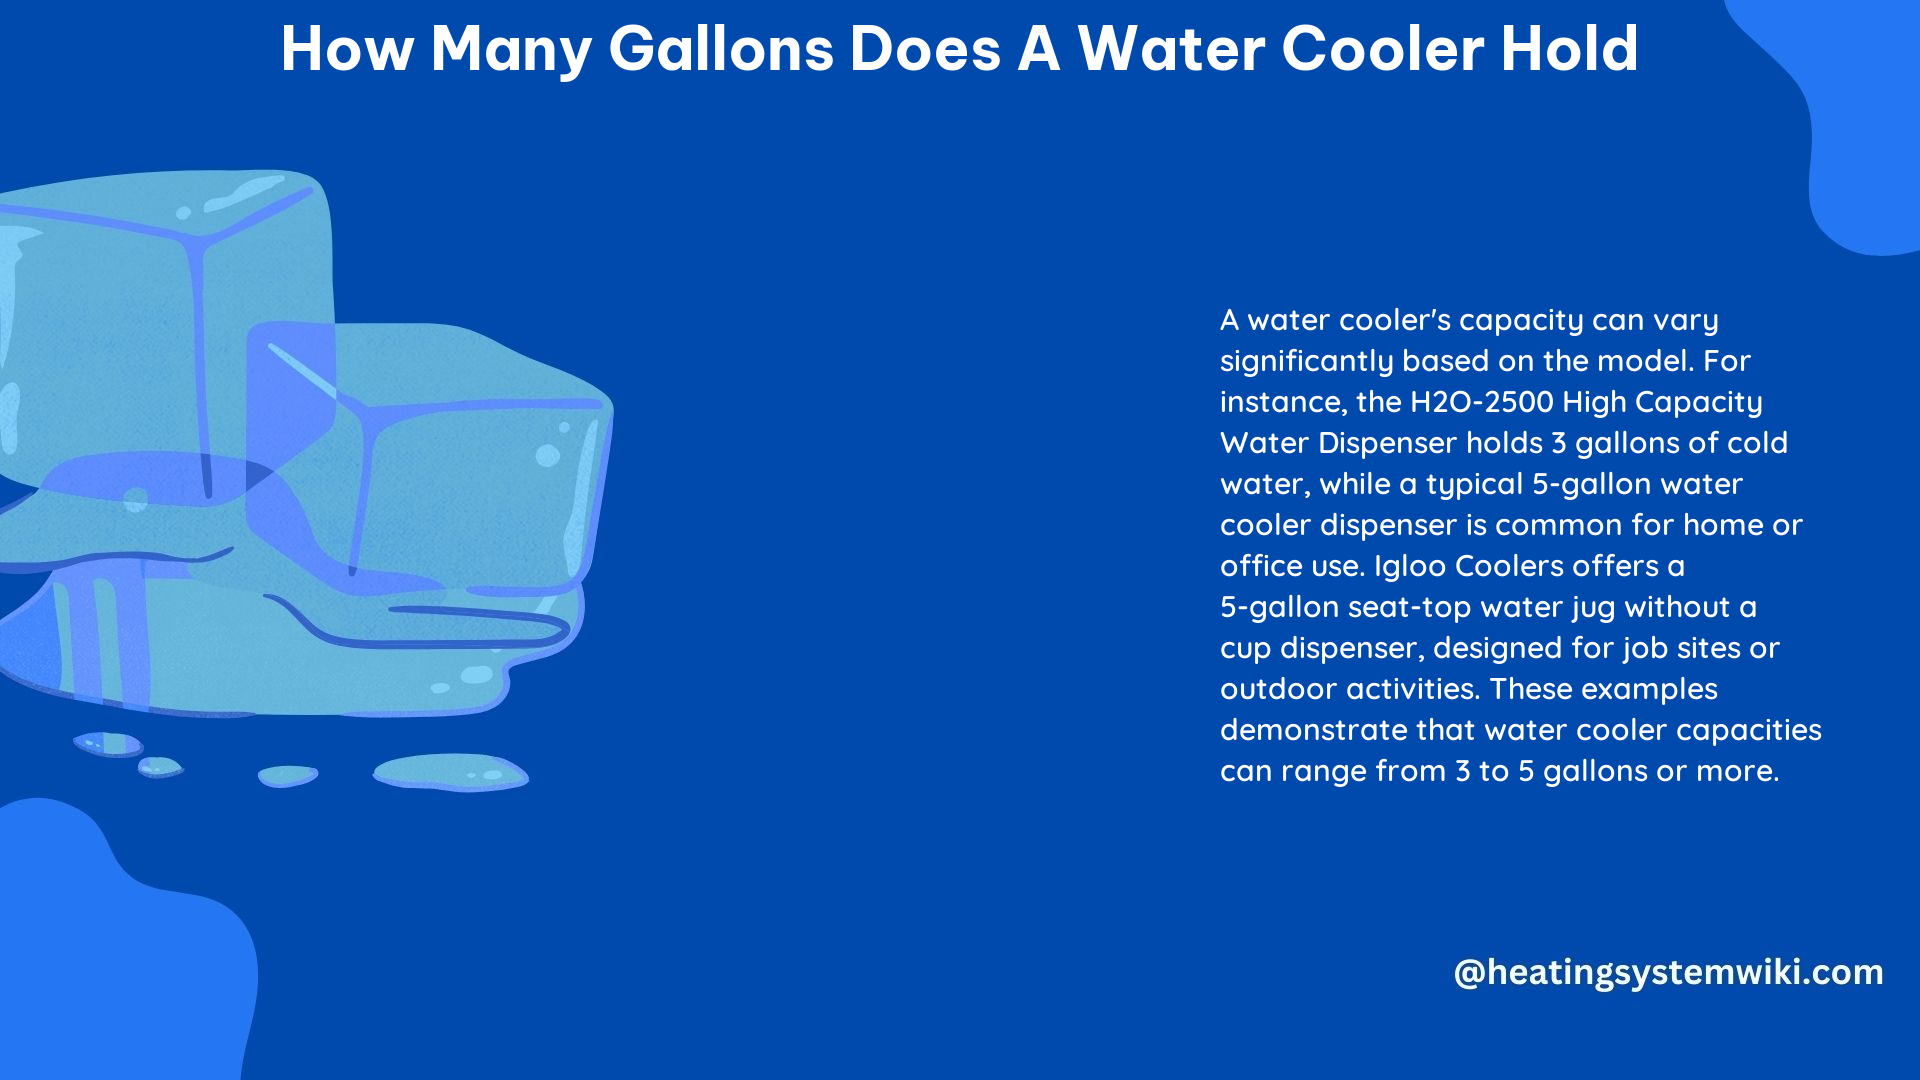 How Many Gallons Does a Water Cooler Hold